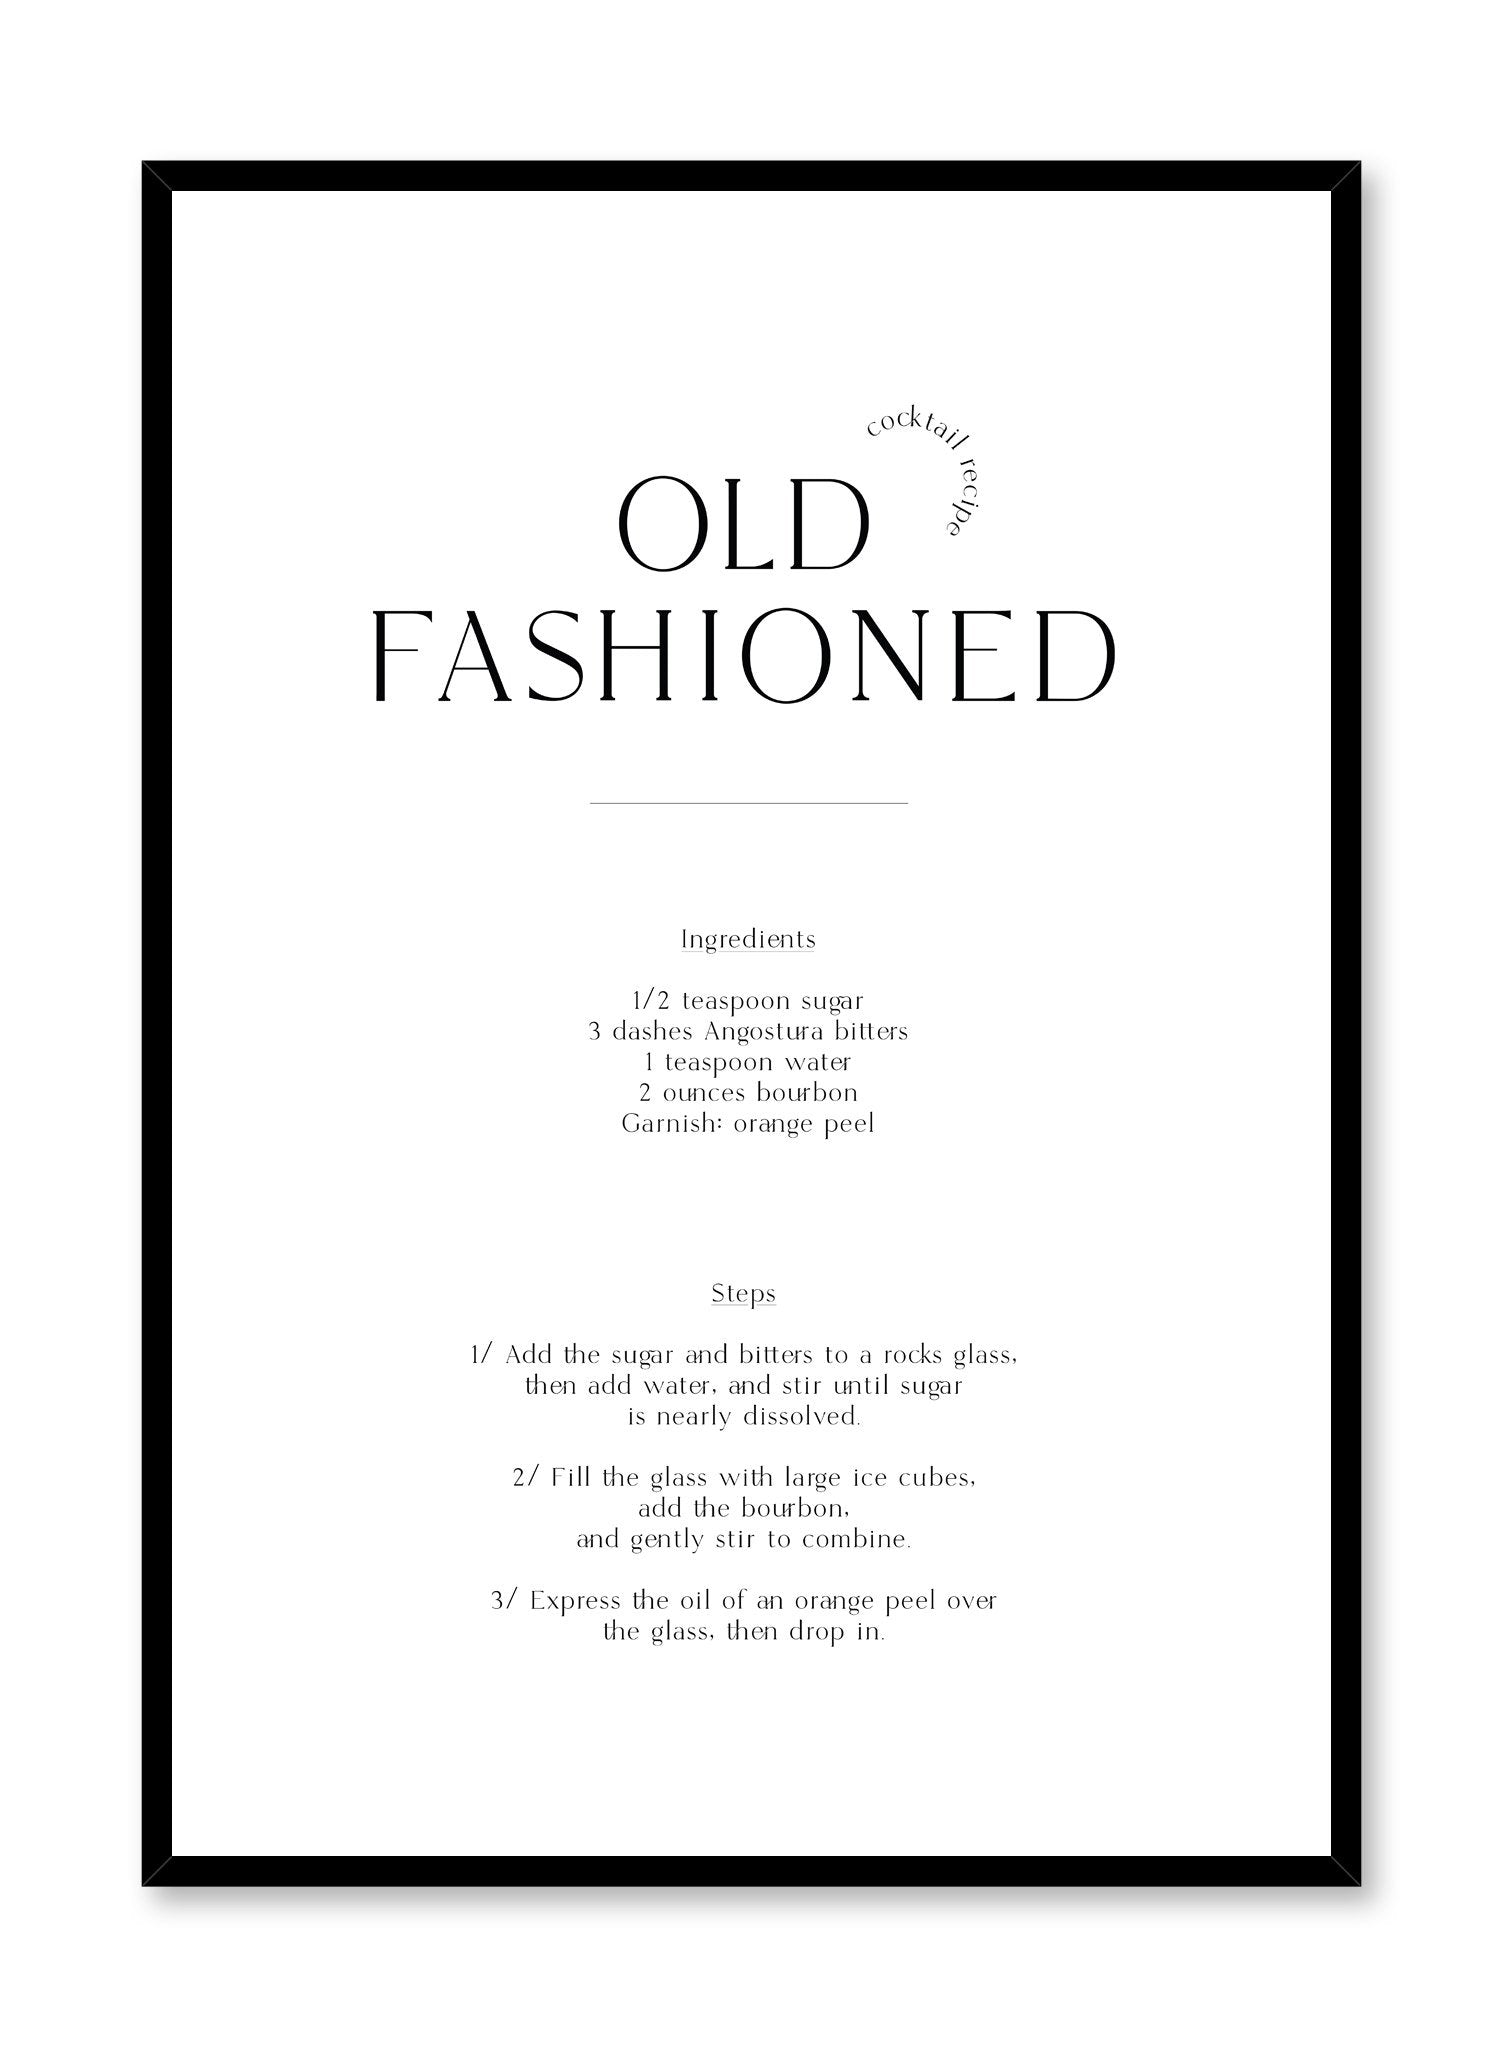 Old Fashioned is a cocktail recipe typography poster by Opposite Wall.